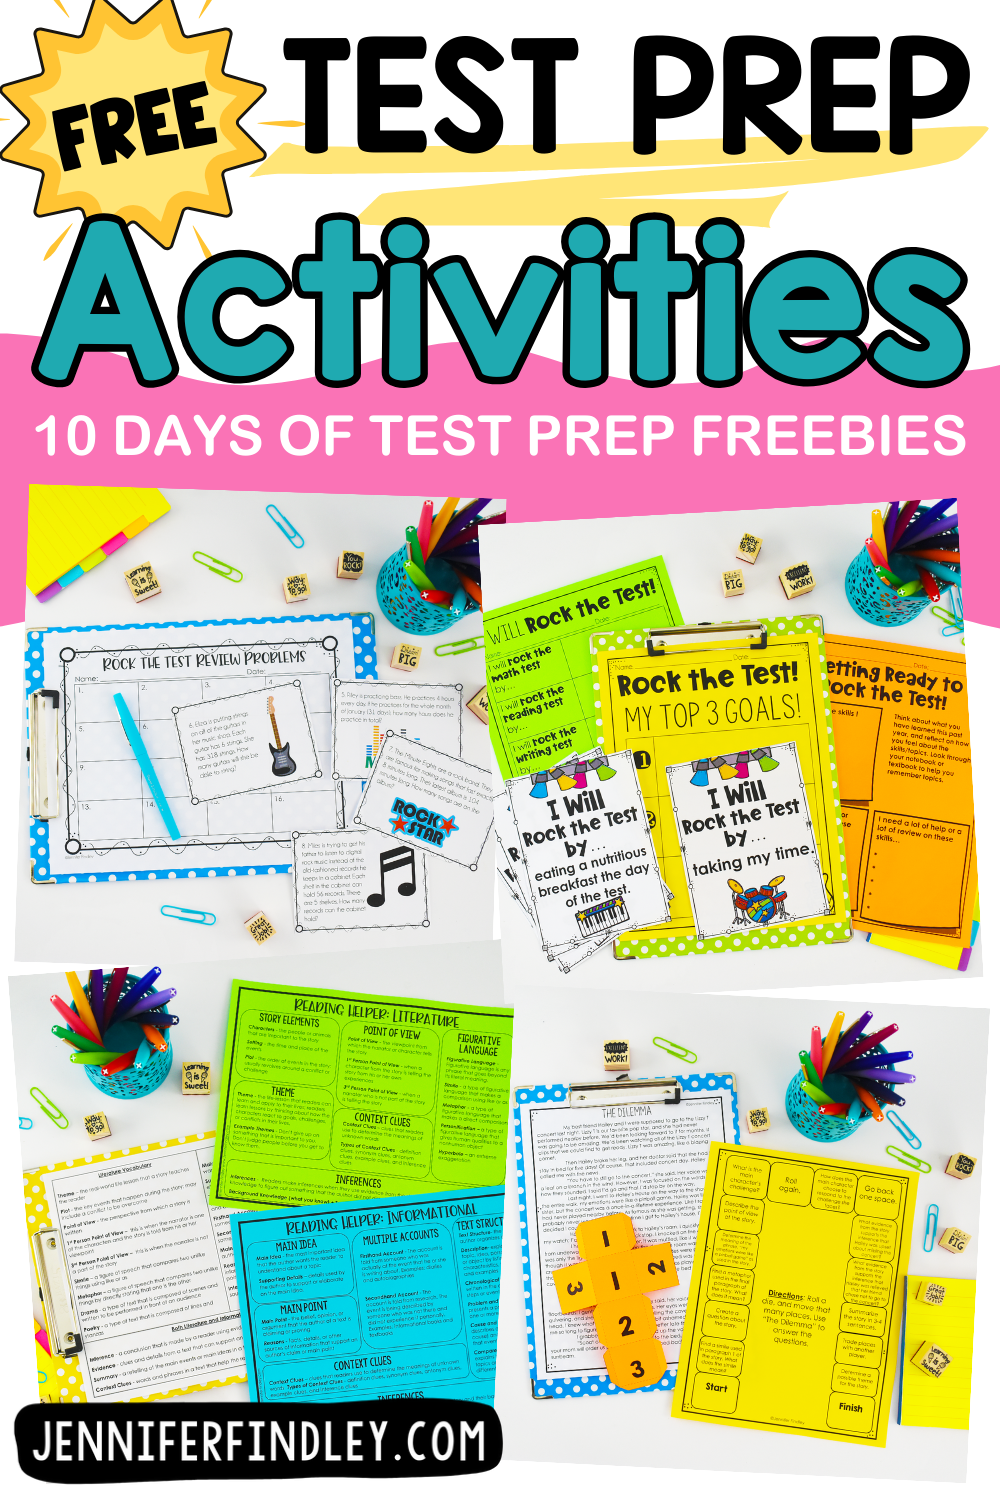 Free test prep activities and resources for 4th and 5th graders!